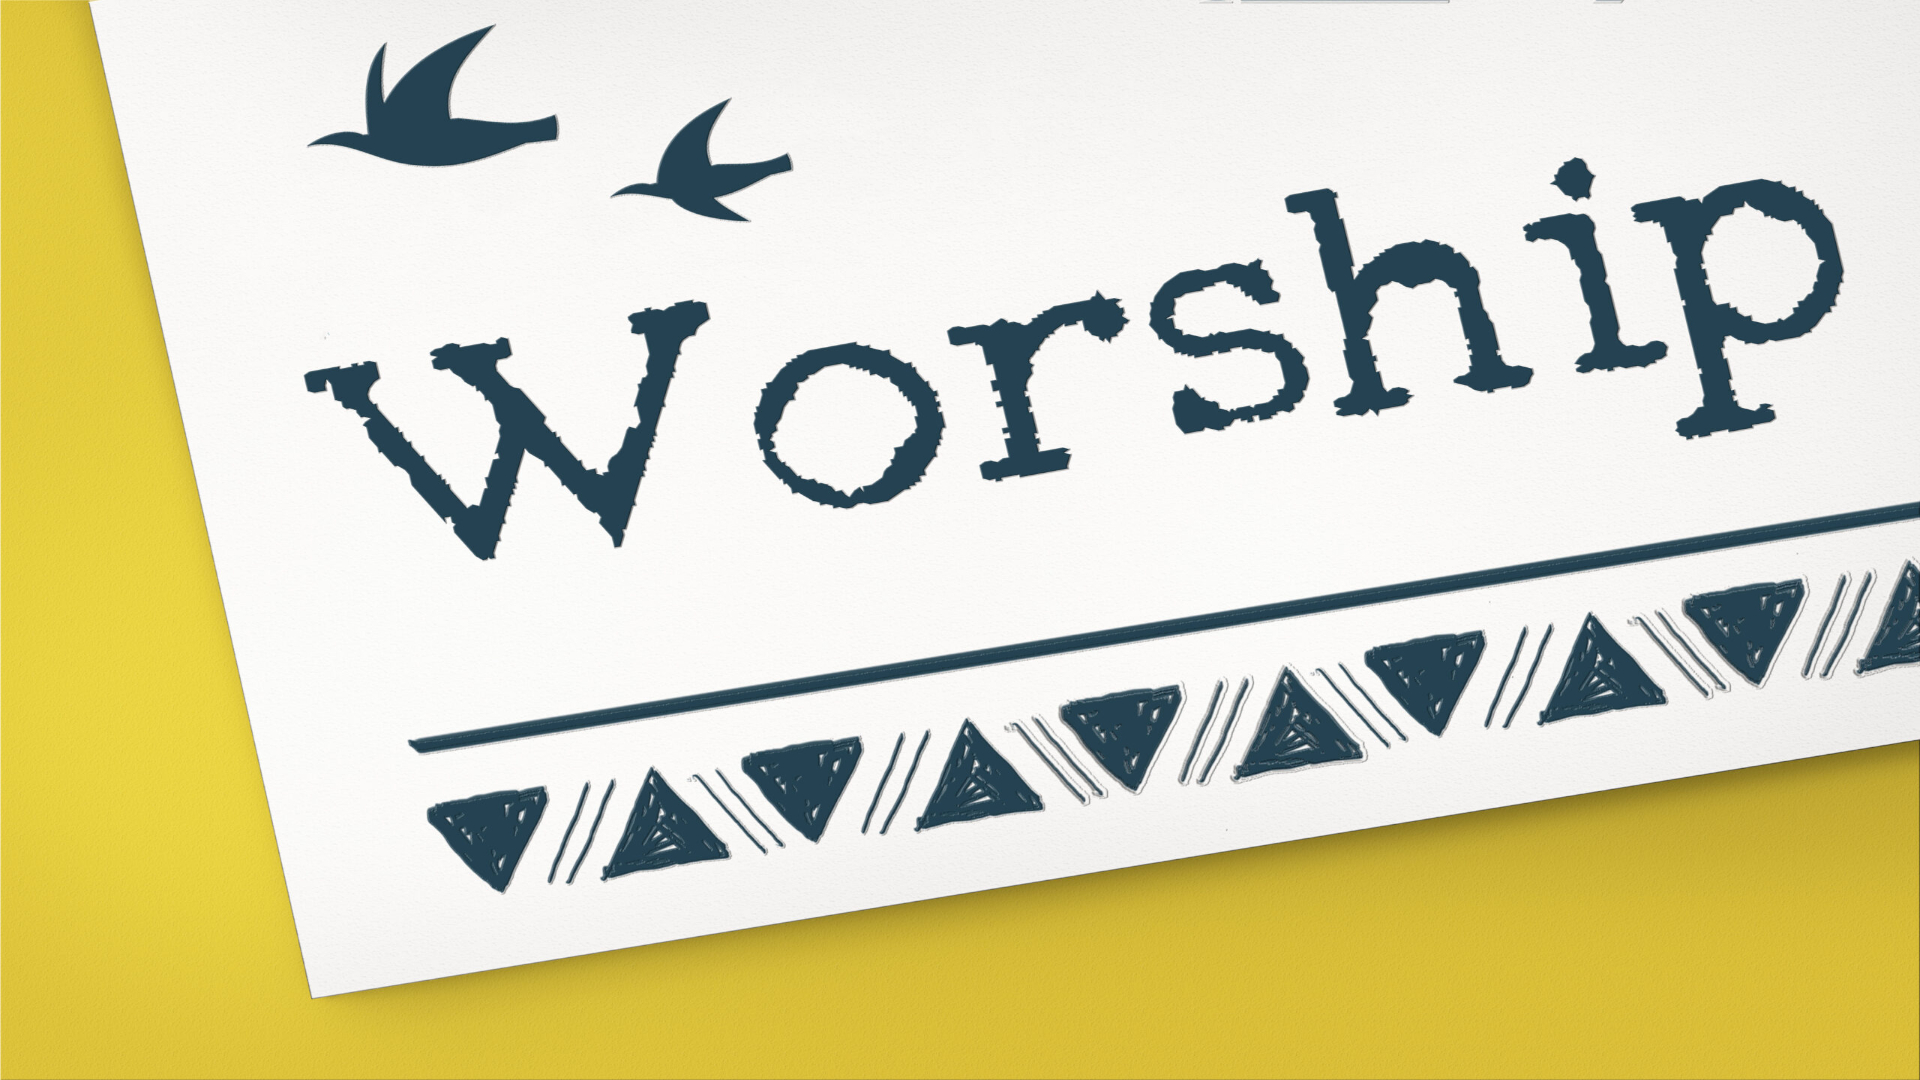 Worship: To Bless and Play